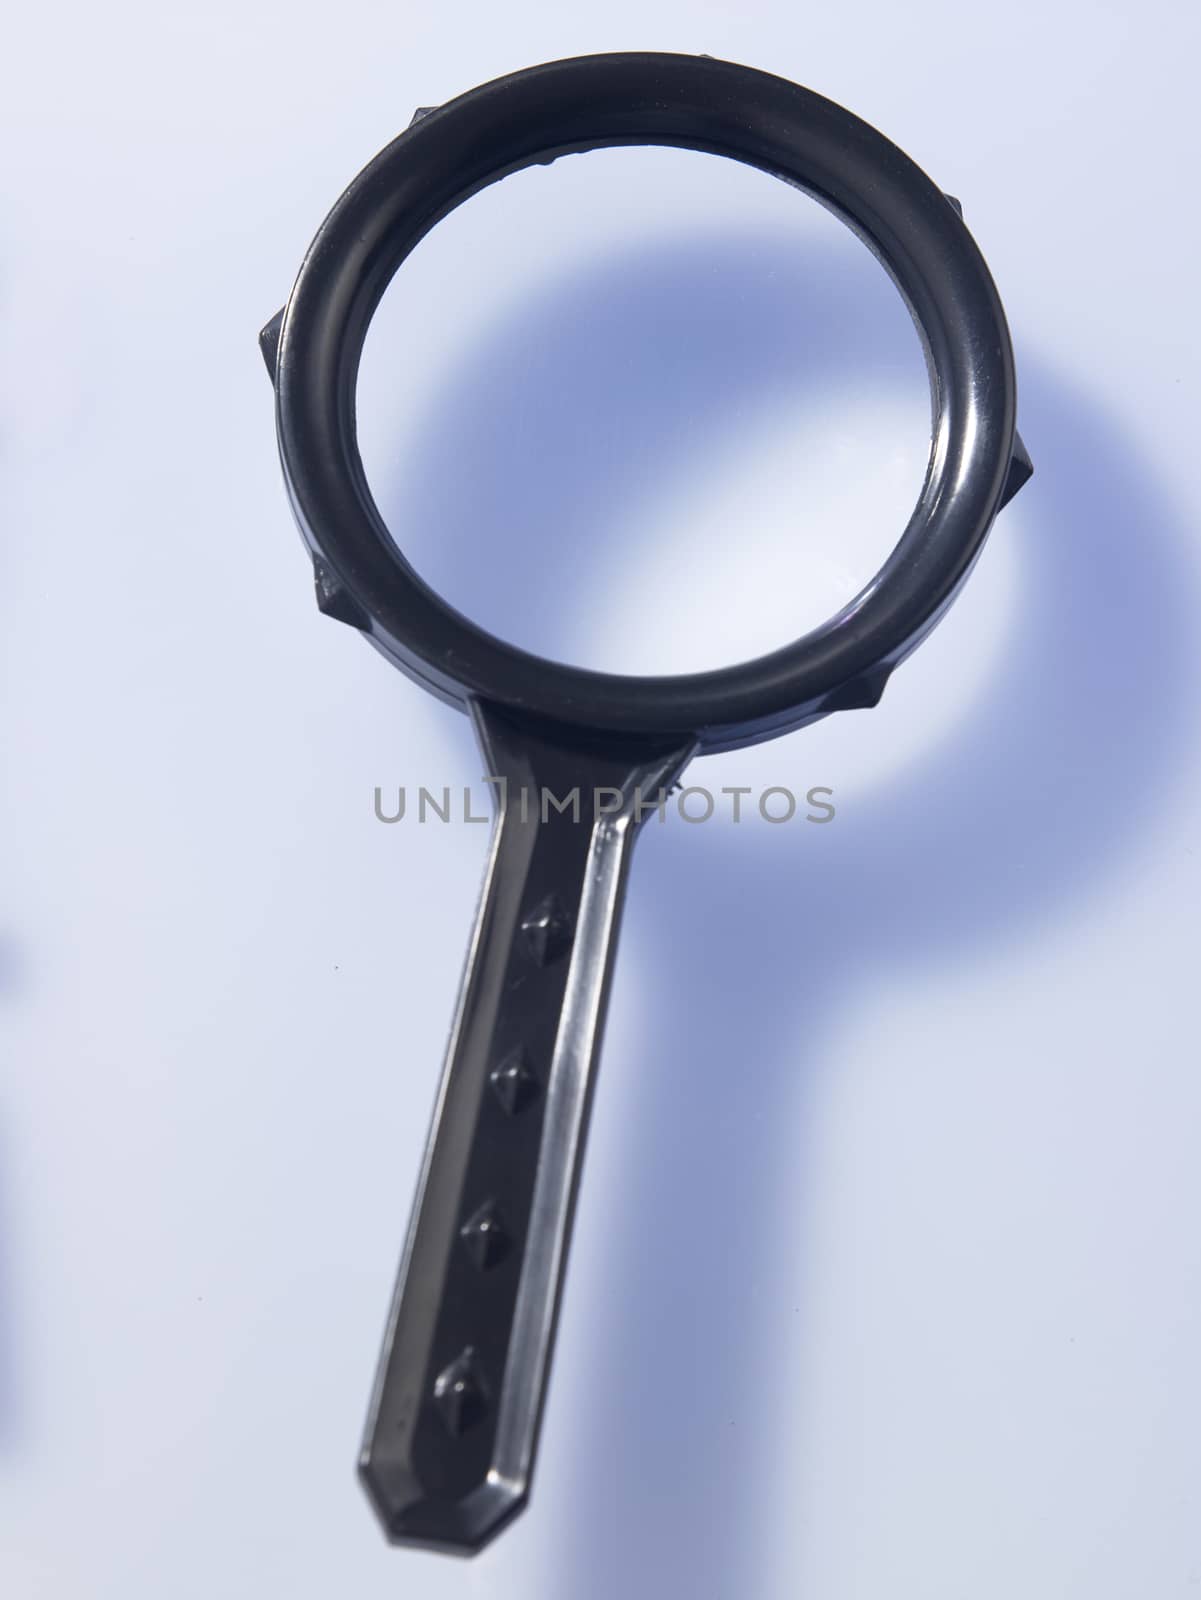 Magnifying glass on top of glass table